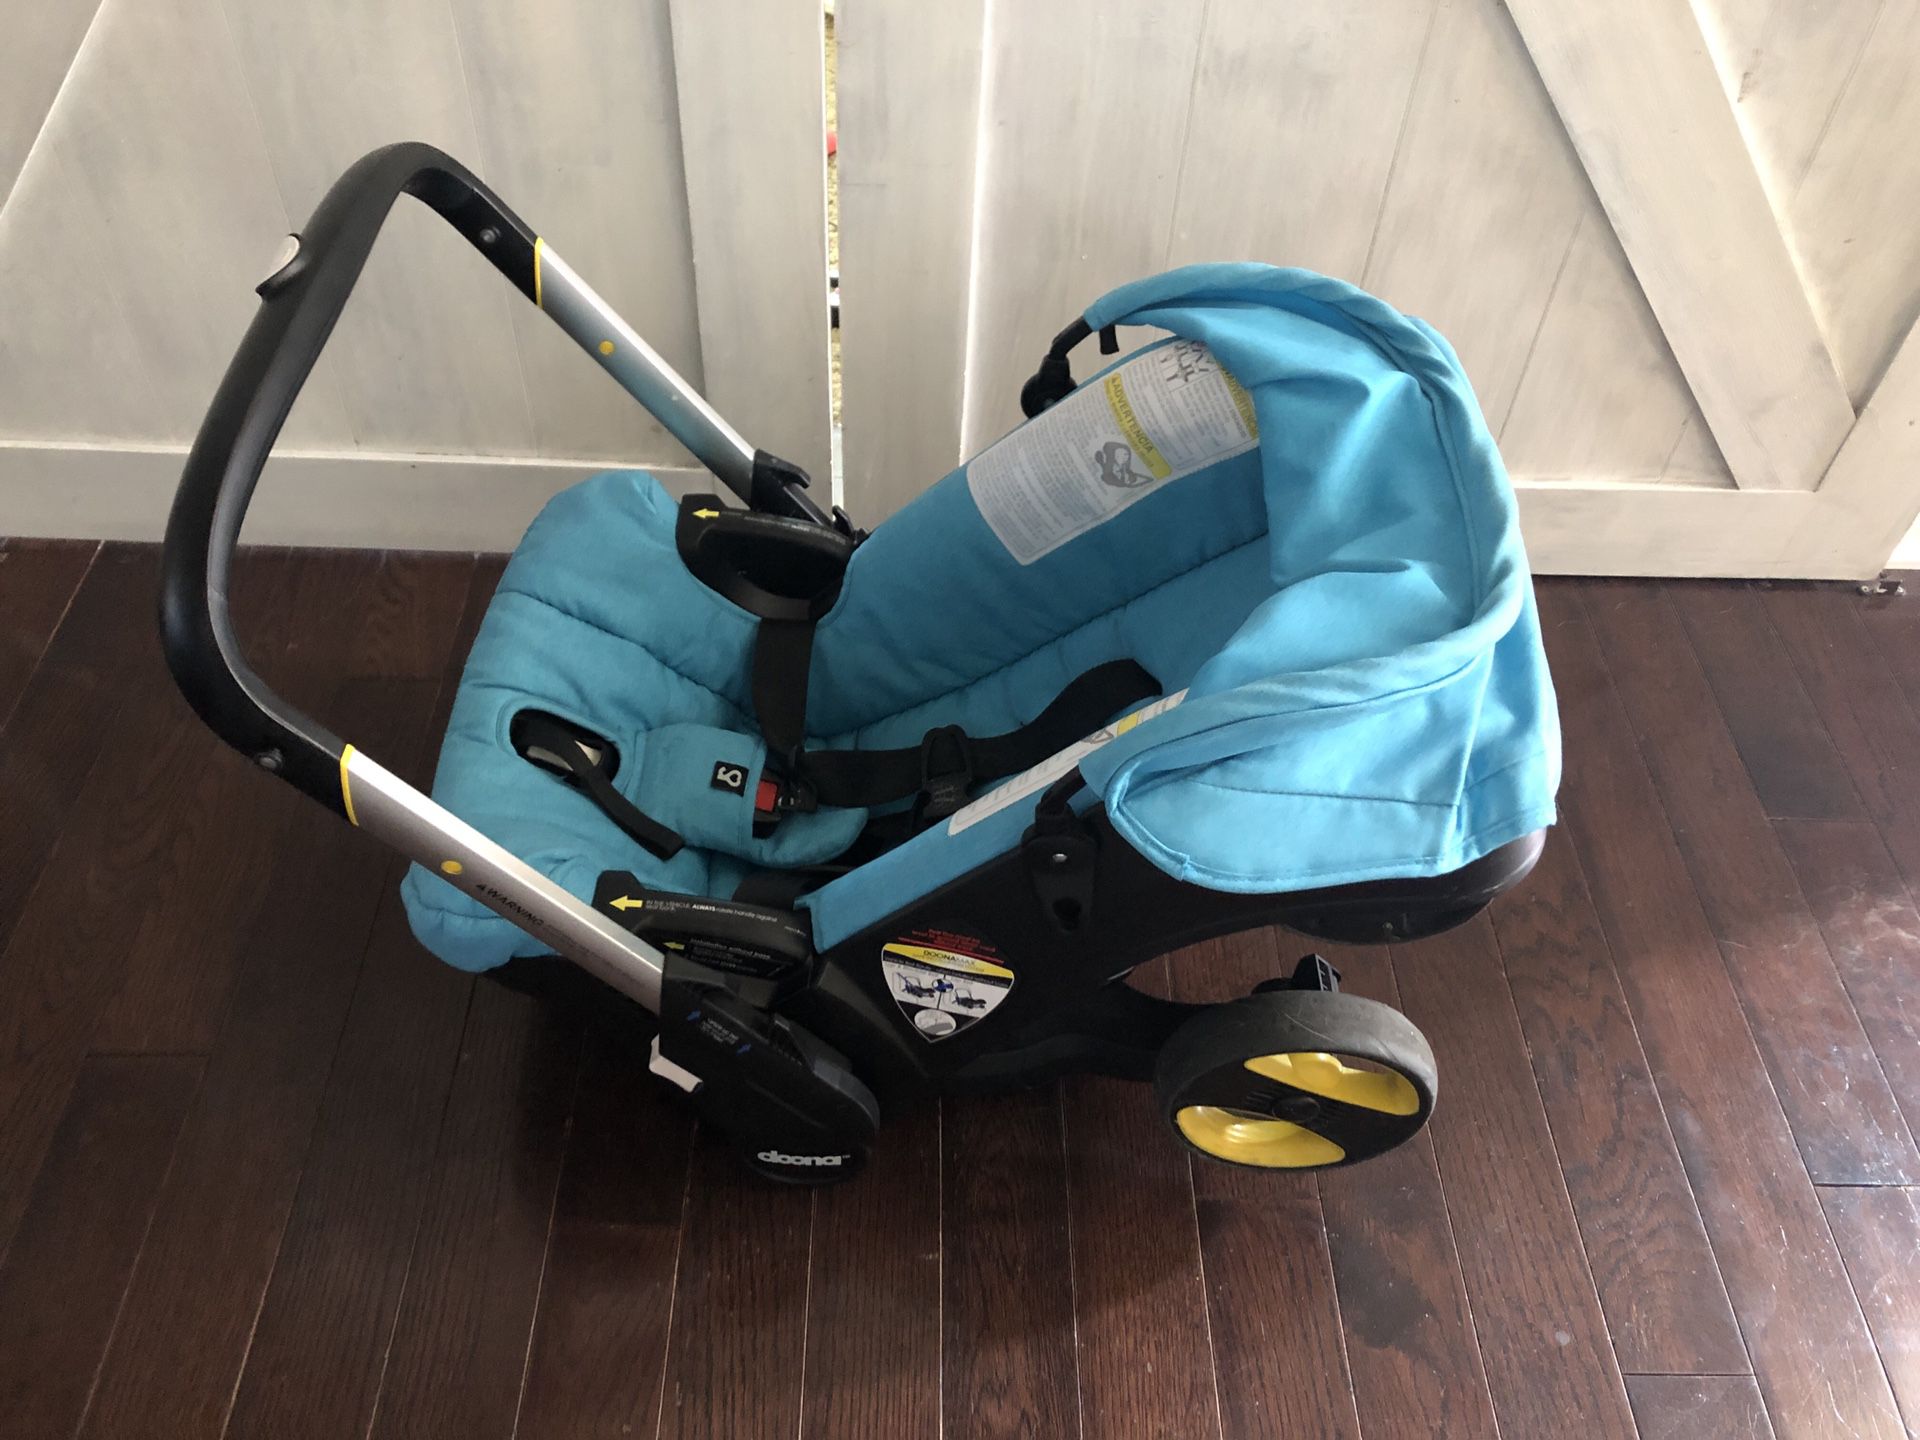 Doona car seat and stroller in one